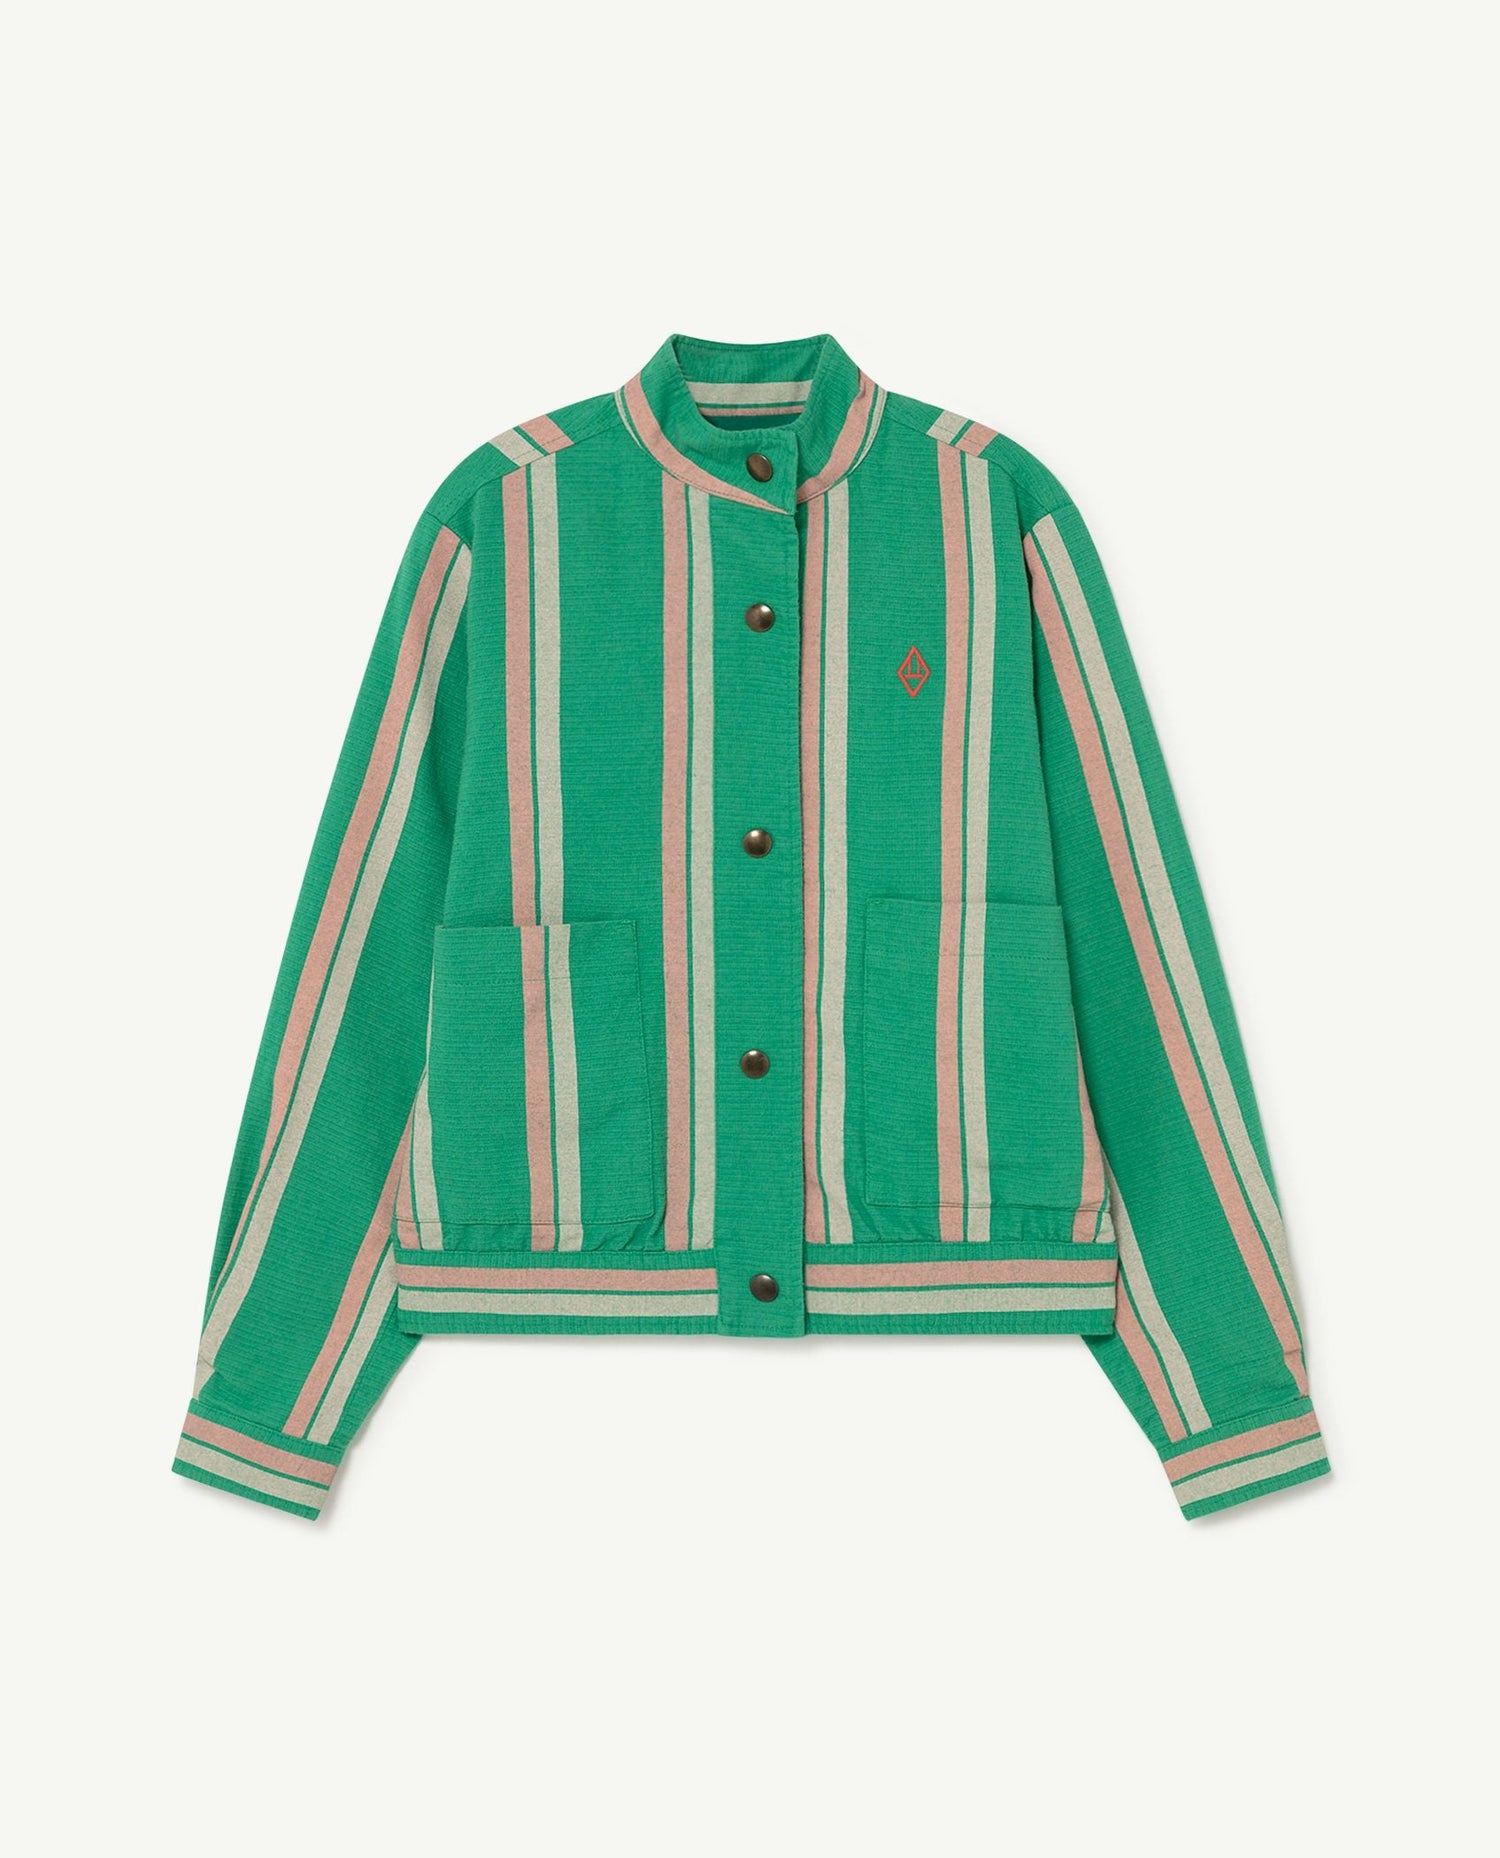 Tiger Jacket green Stripes Outerwear The Animals Observatory 